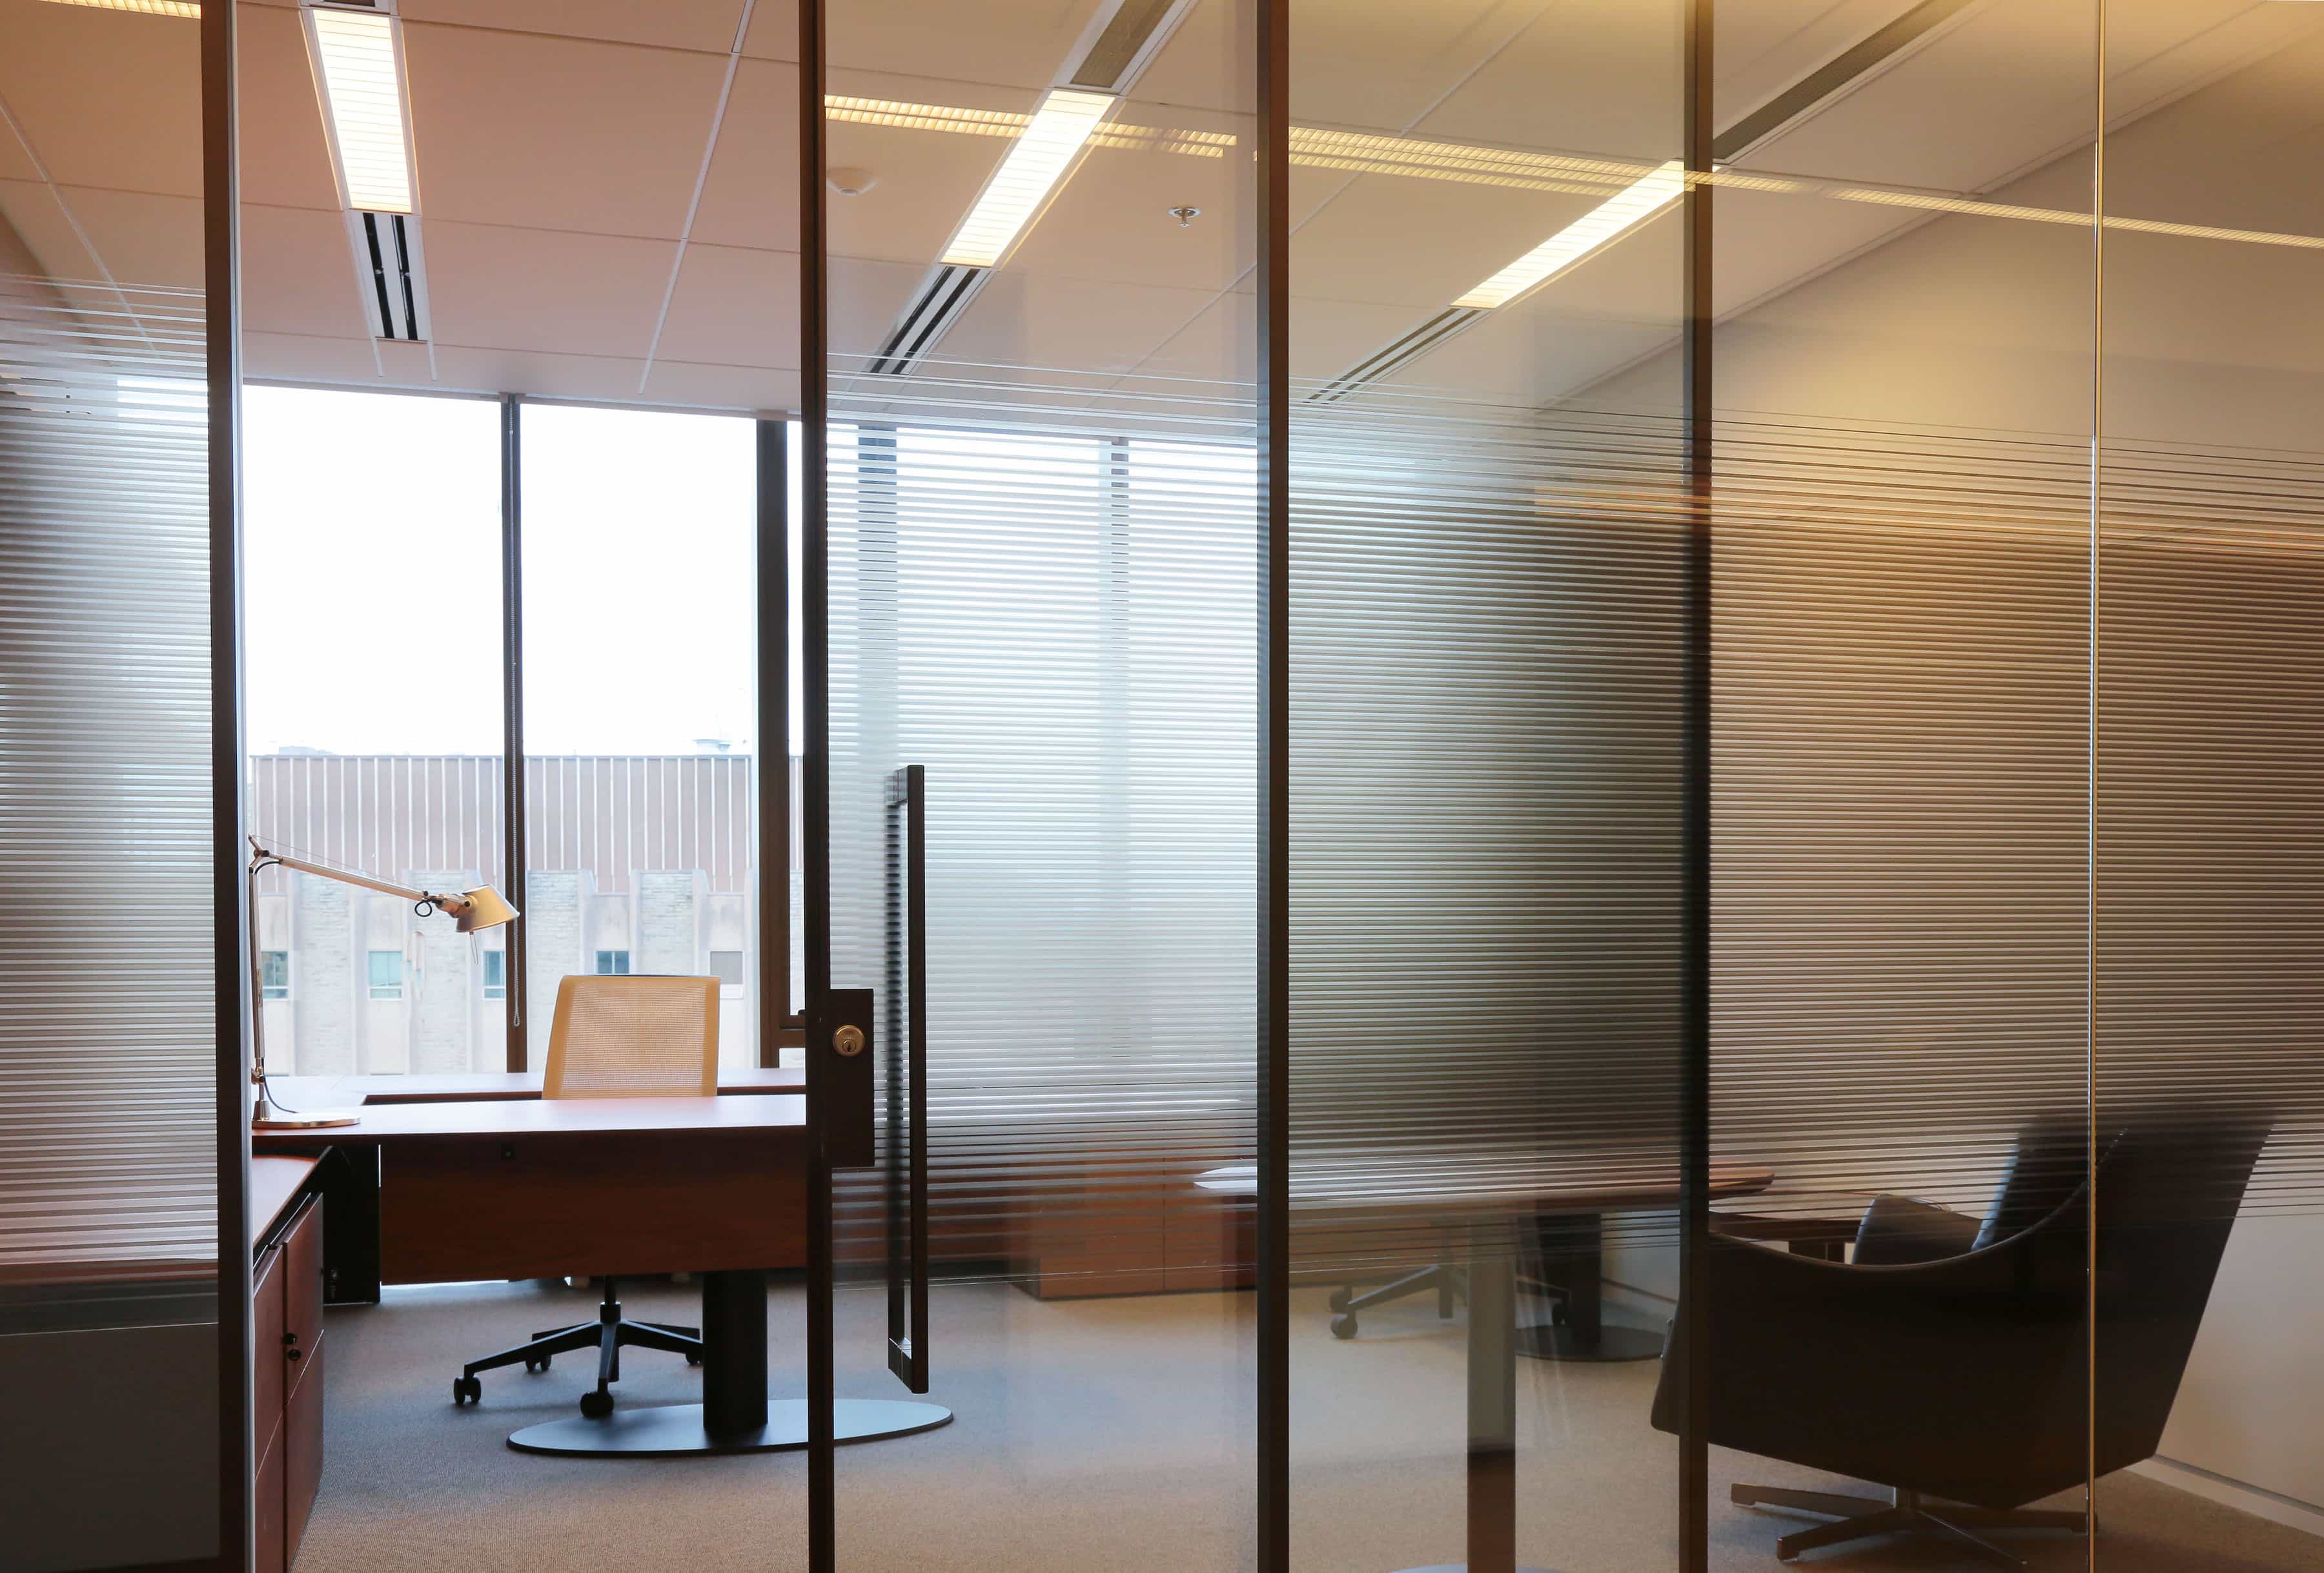 Clear glass materials create private space without sacrificing natural light.